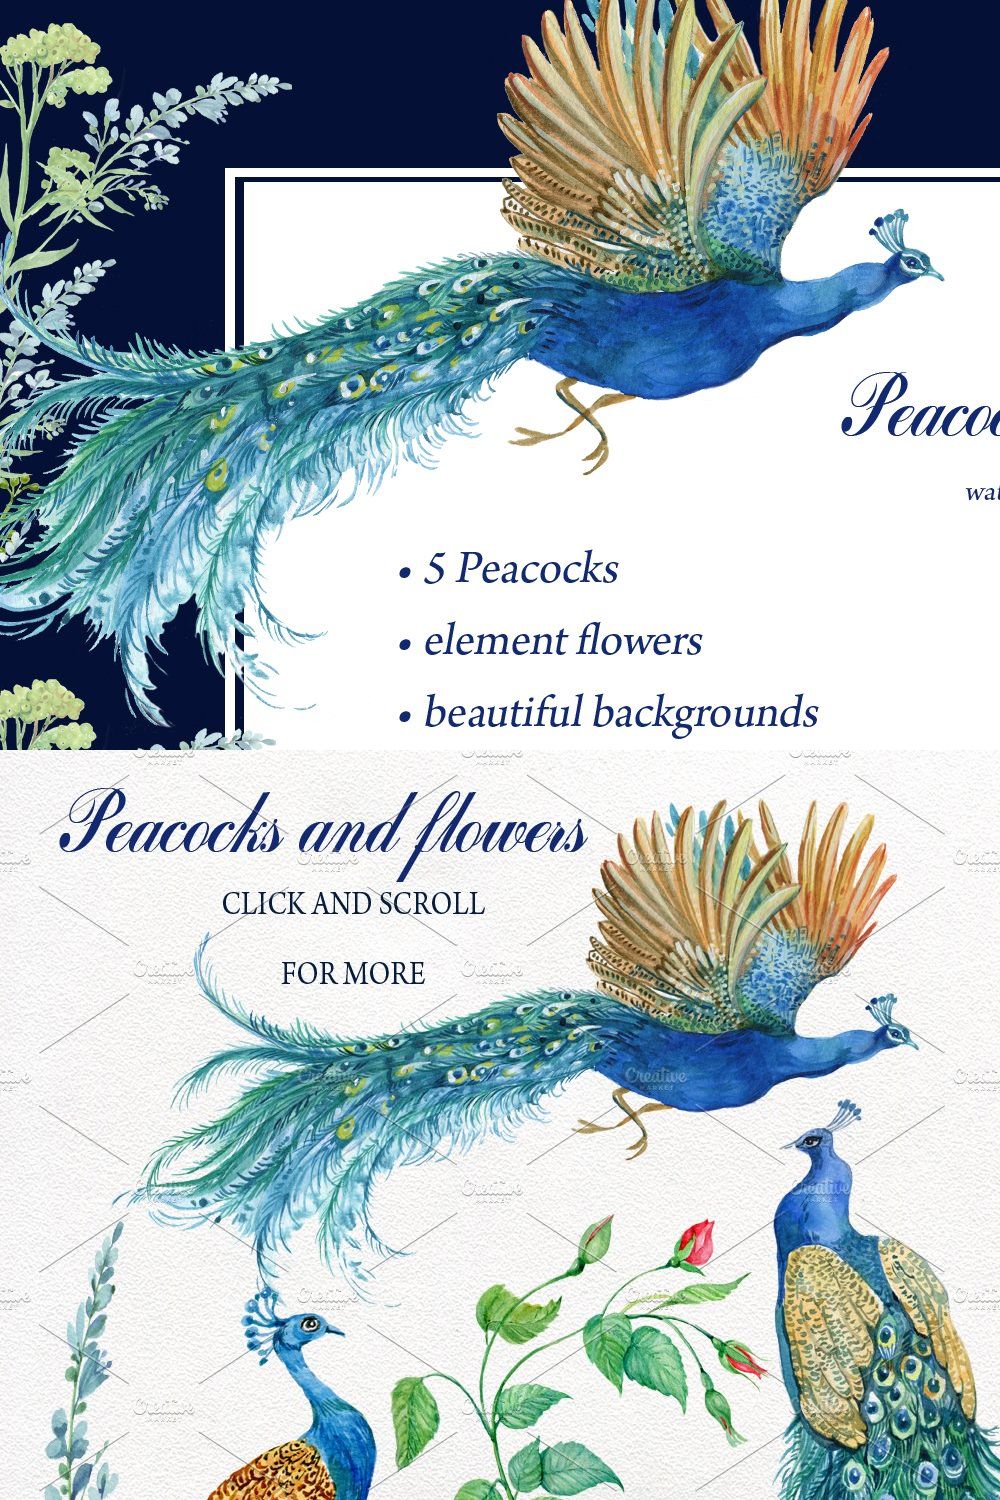 Peacocks and flowers/watercolor pinterest preview image.